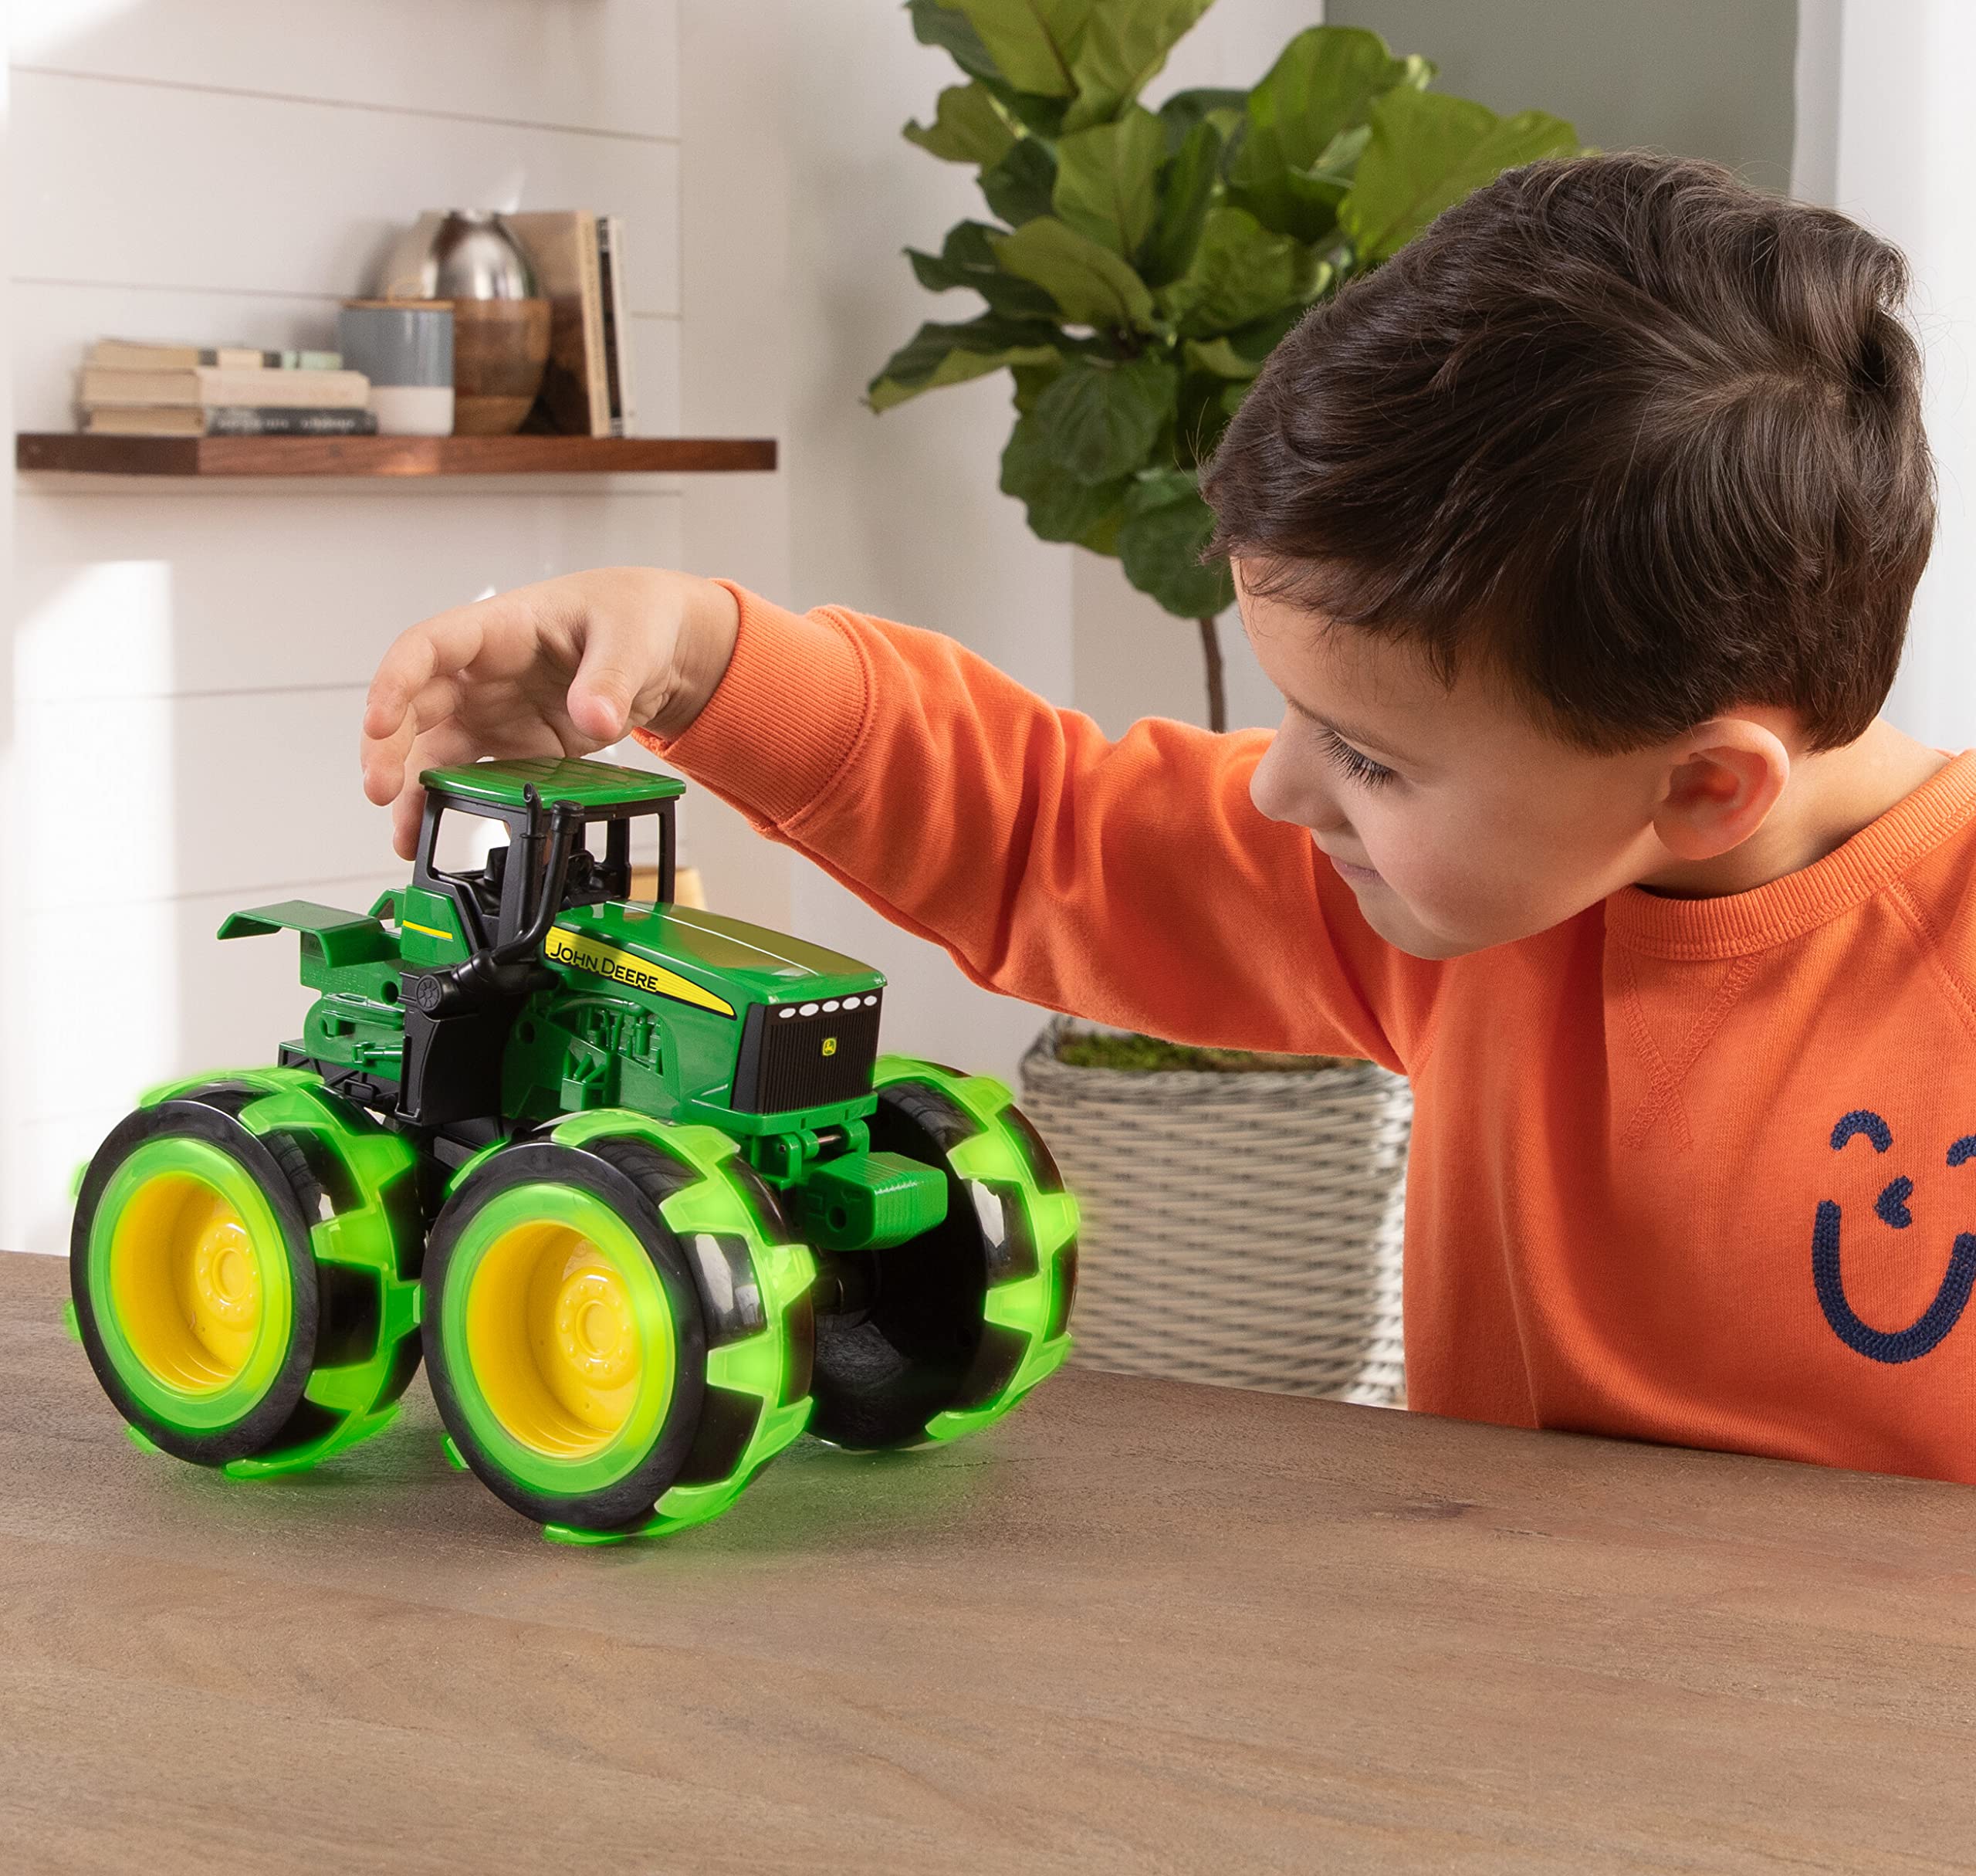 John Deere Tractor - Monster Treads Lightning Wheels - Motion Activated Light Up Monster Truck Toy - John Deere Tractor Toys - Kids Toys Ages 3 Years and Up,Green